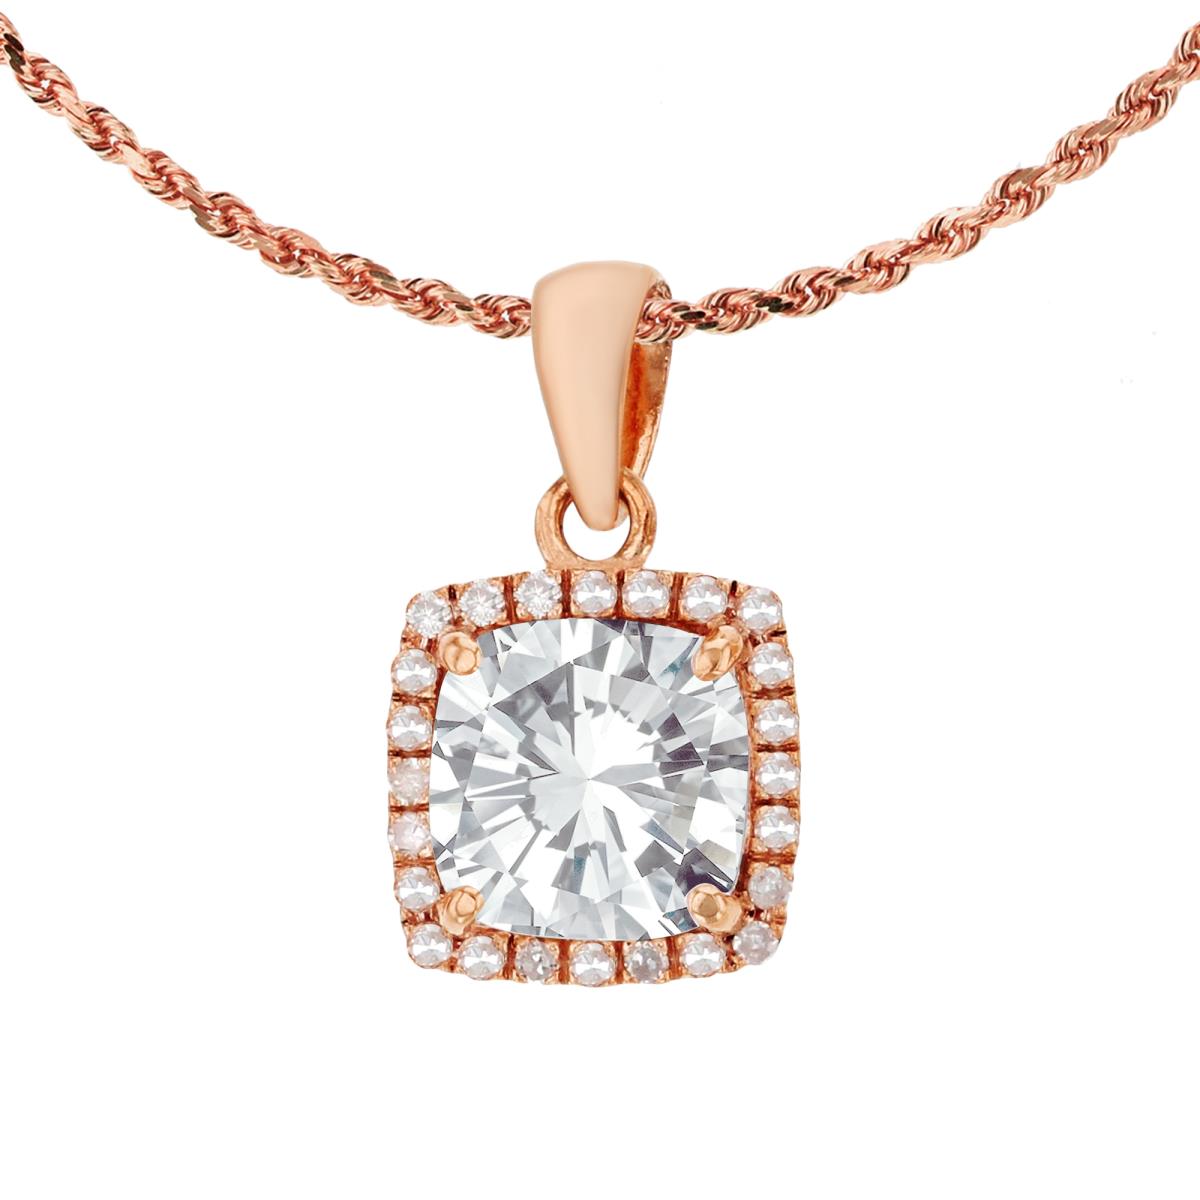 14K Rose Gold 7mm Cushion White Topaz & 0.12 CTTW Diamond Halo 18" Rope Chain Necklace